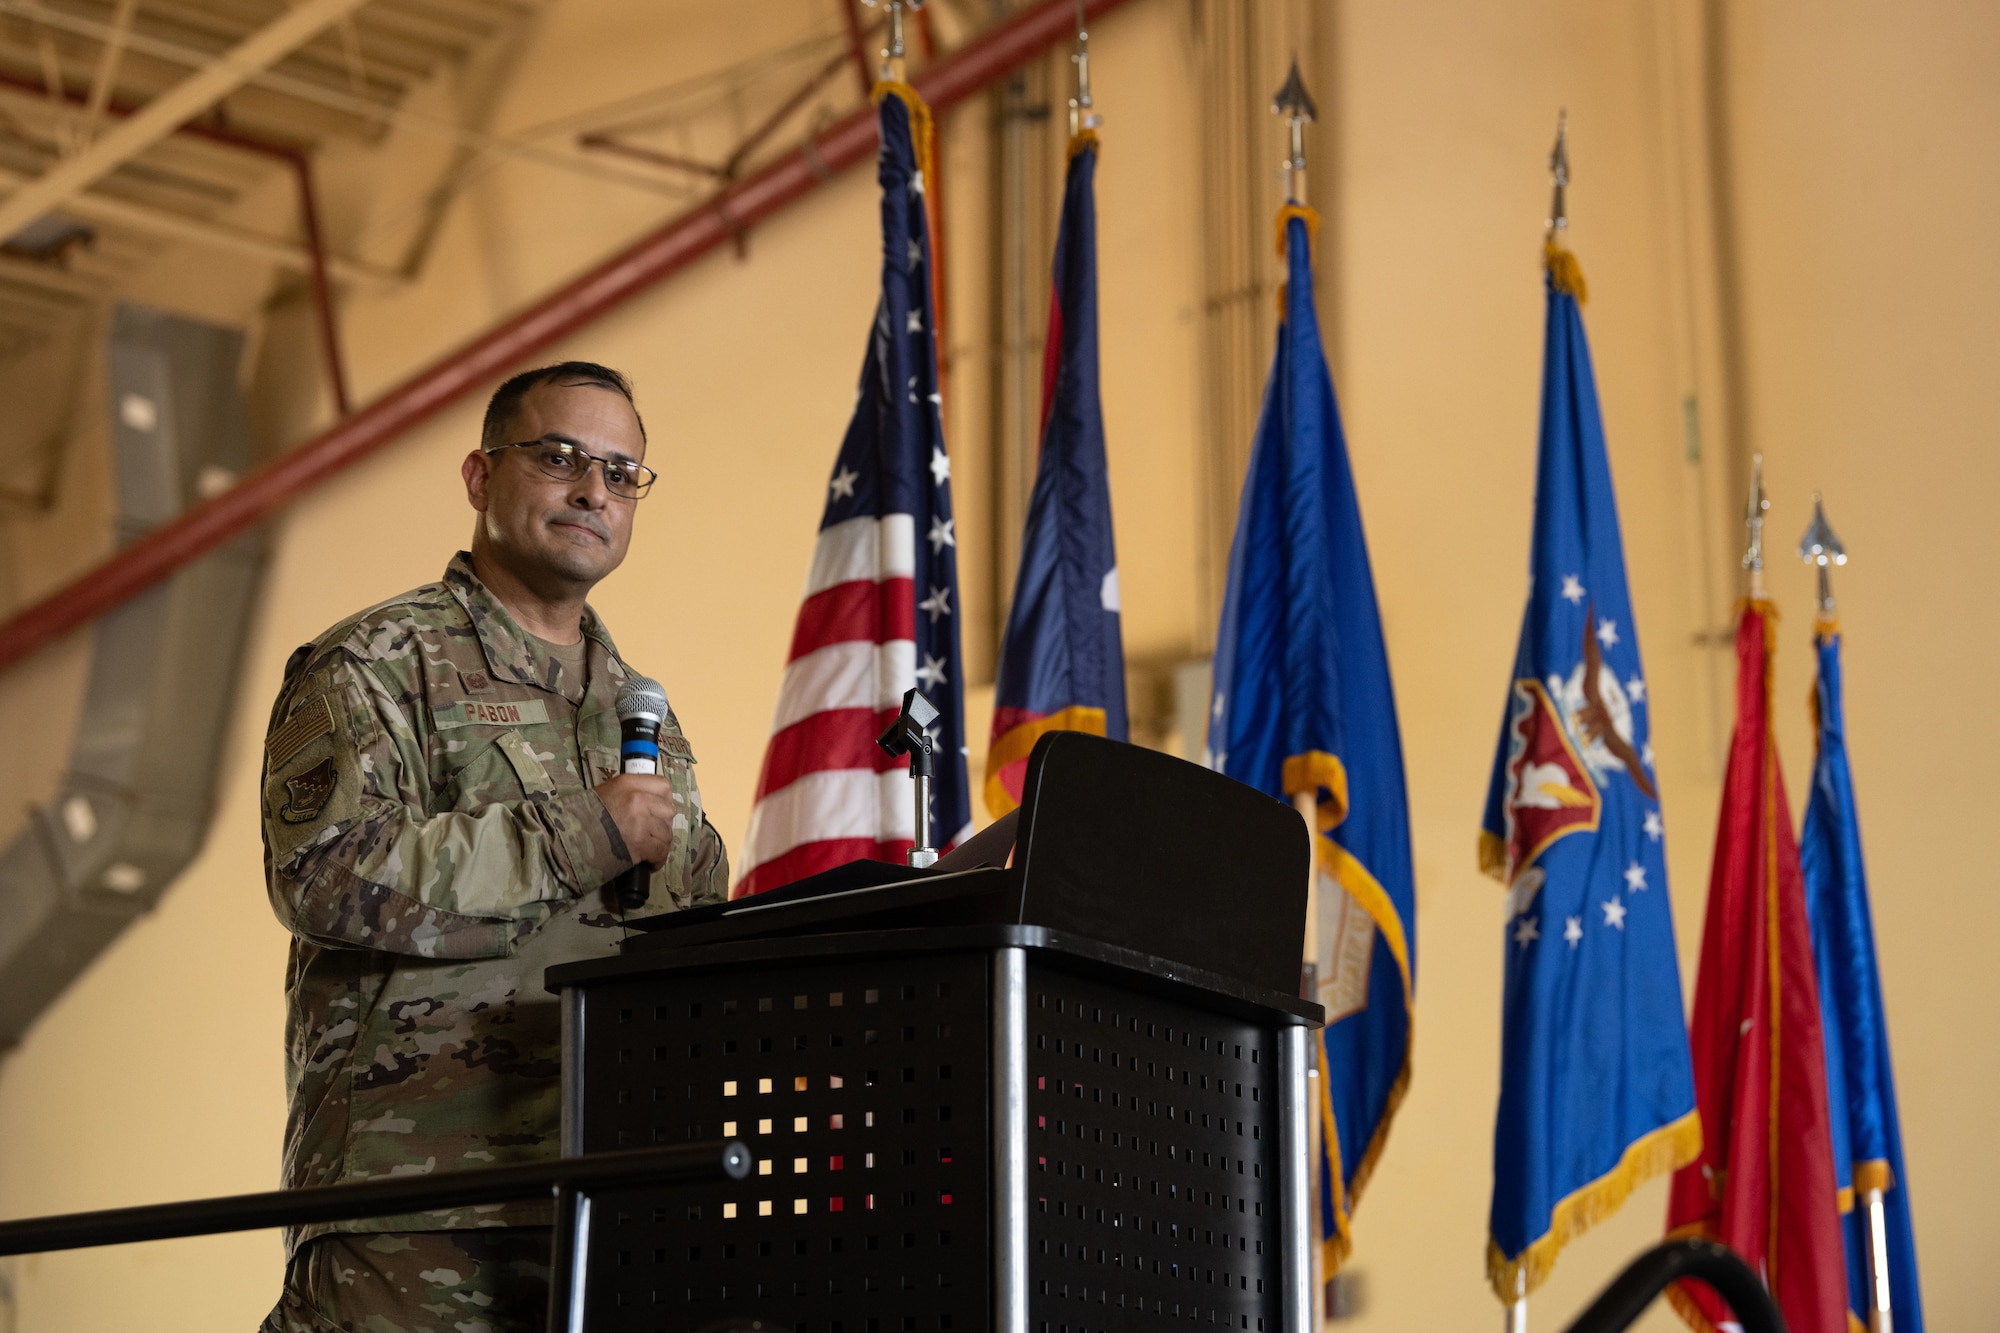 U.S. Air Force Col. Humberto Pabon Jr., the 156th Wing commander, delivers his speech after his assumption of command during the 156th Wing change of command ceremony at Muñiz Air National Guard Base, Carolina, Puerto Rico, Oct. 15, 2022. The change of command ceremony took place during the October regularly scheduled drill. (U.S. Air National Guard photo by Staff Sgt. Eliezer Soto)